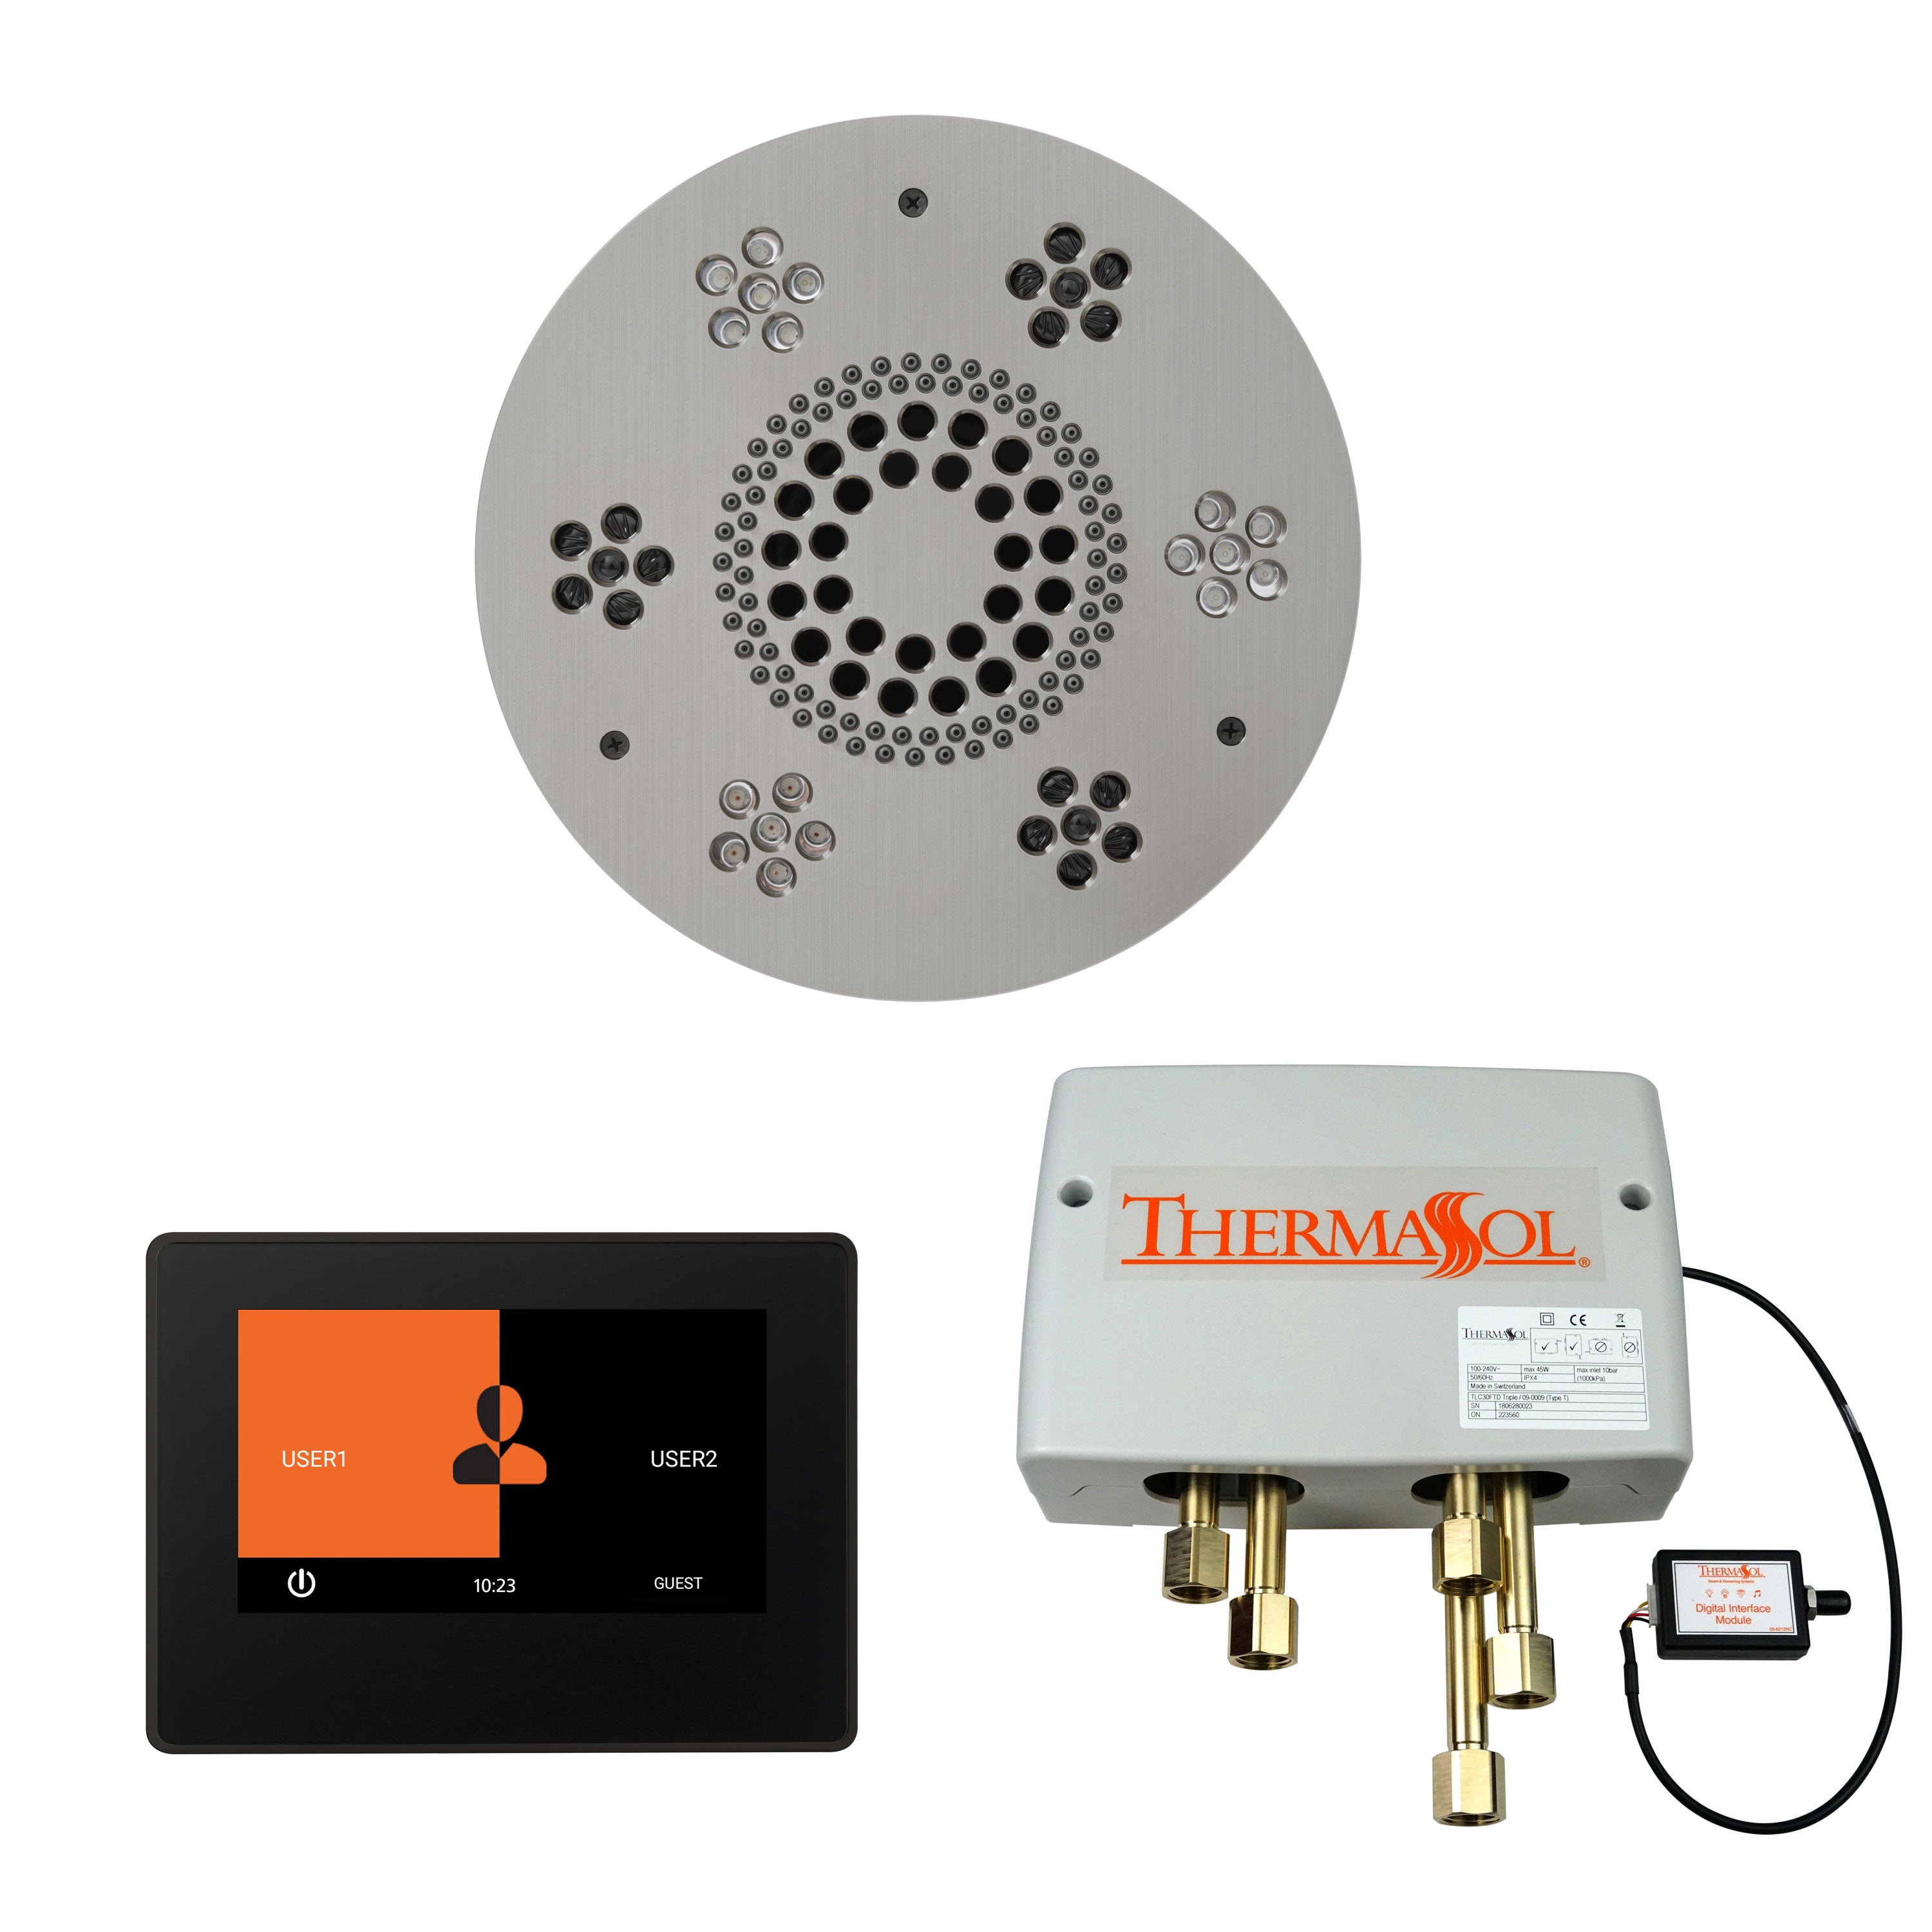 ThermaSol Shower Kit - The Wellness Shower Package with 7" ThermaTouch